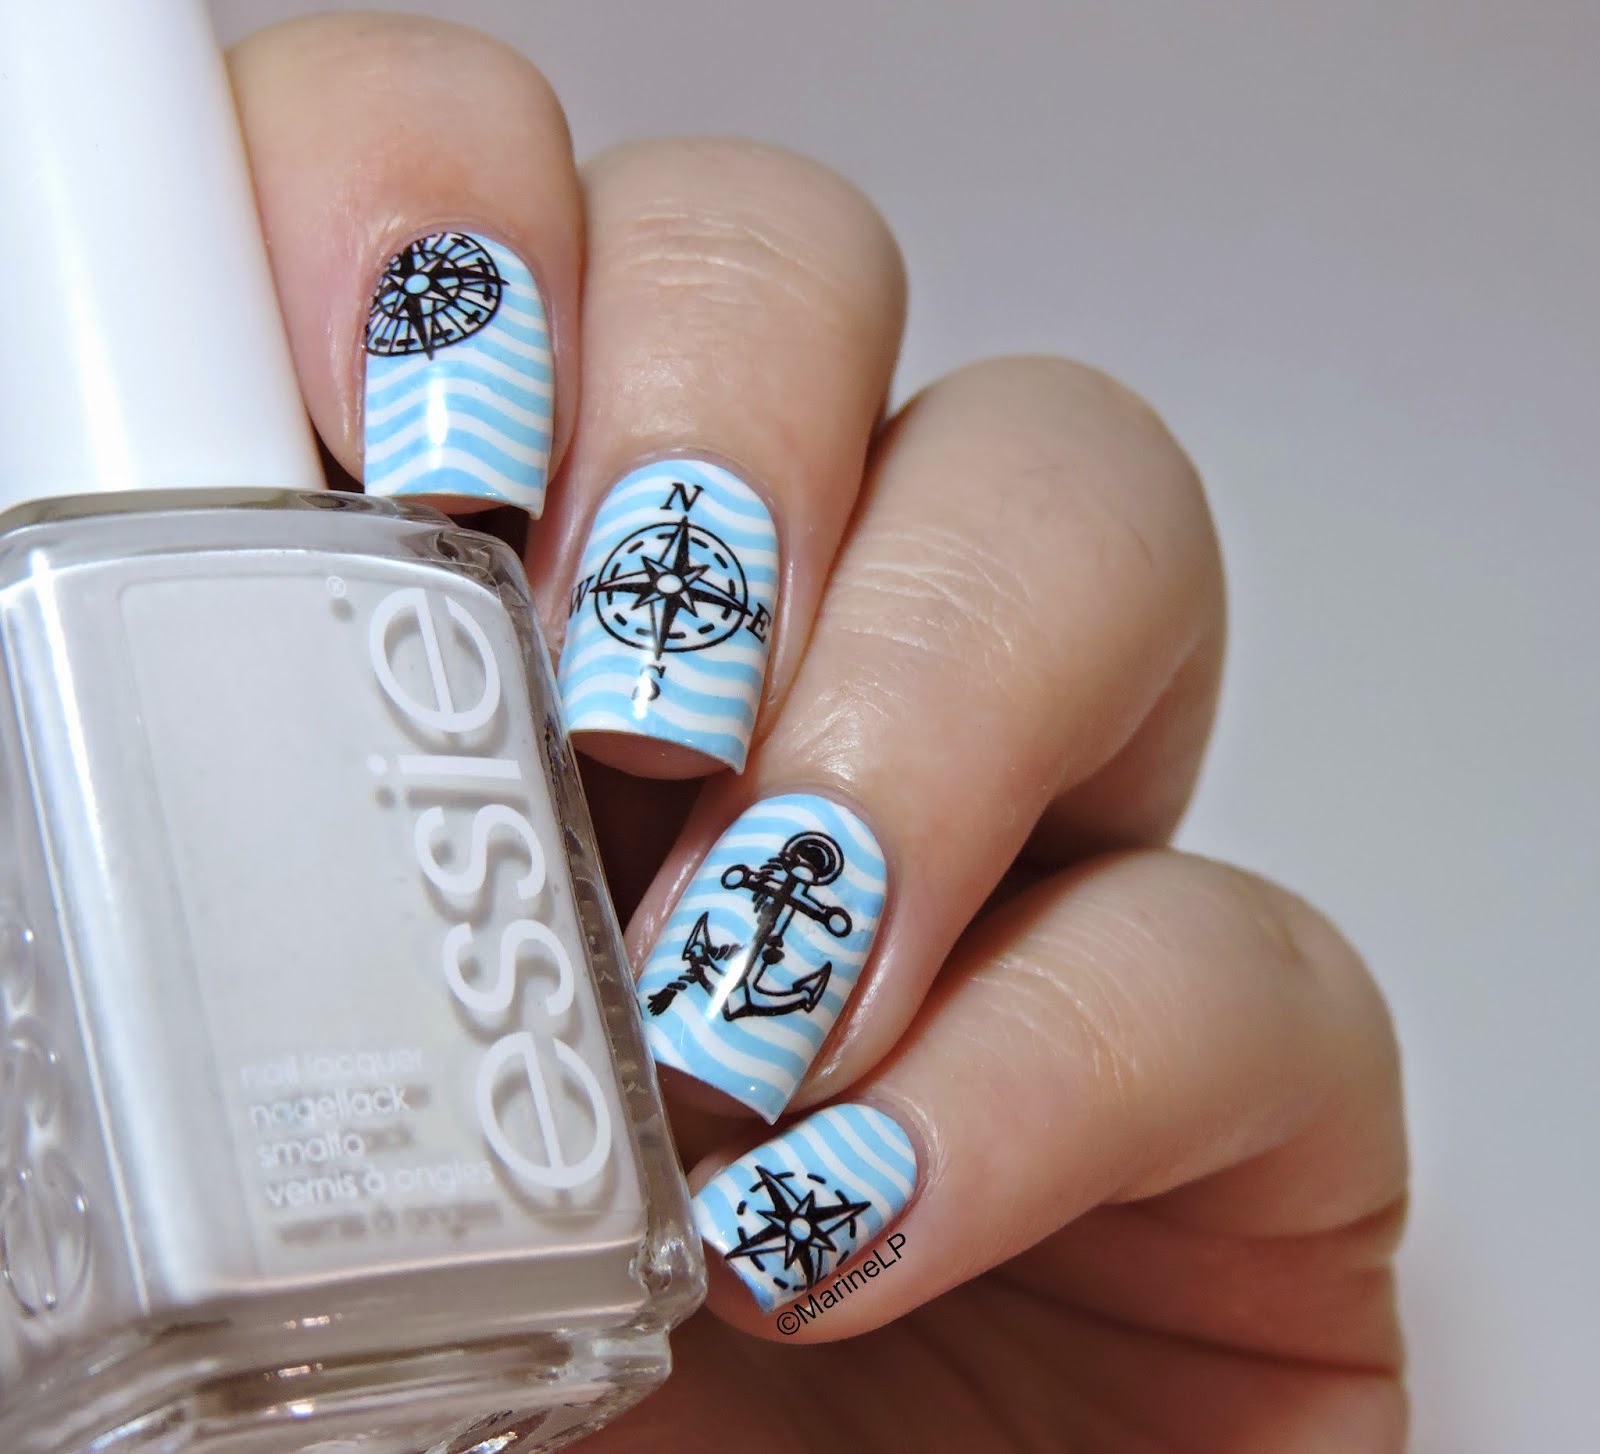 August Amazing Nail Designs Show Time (2)